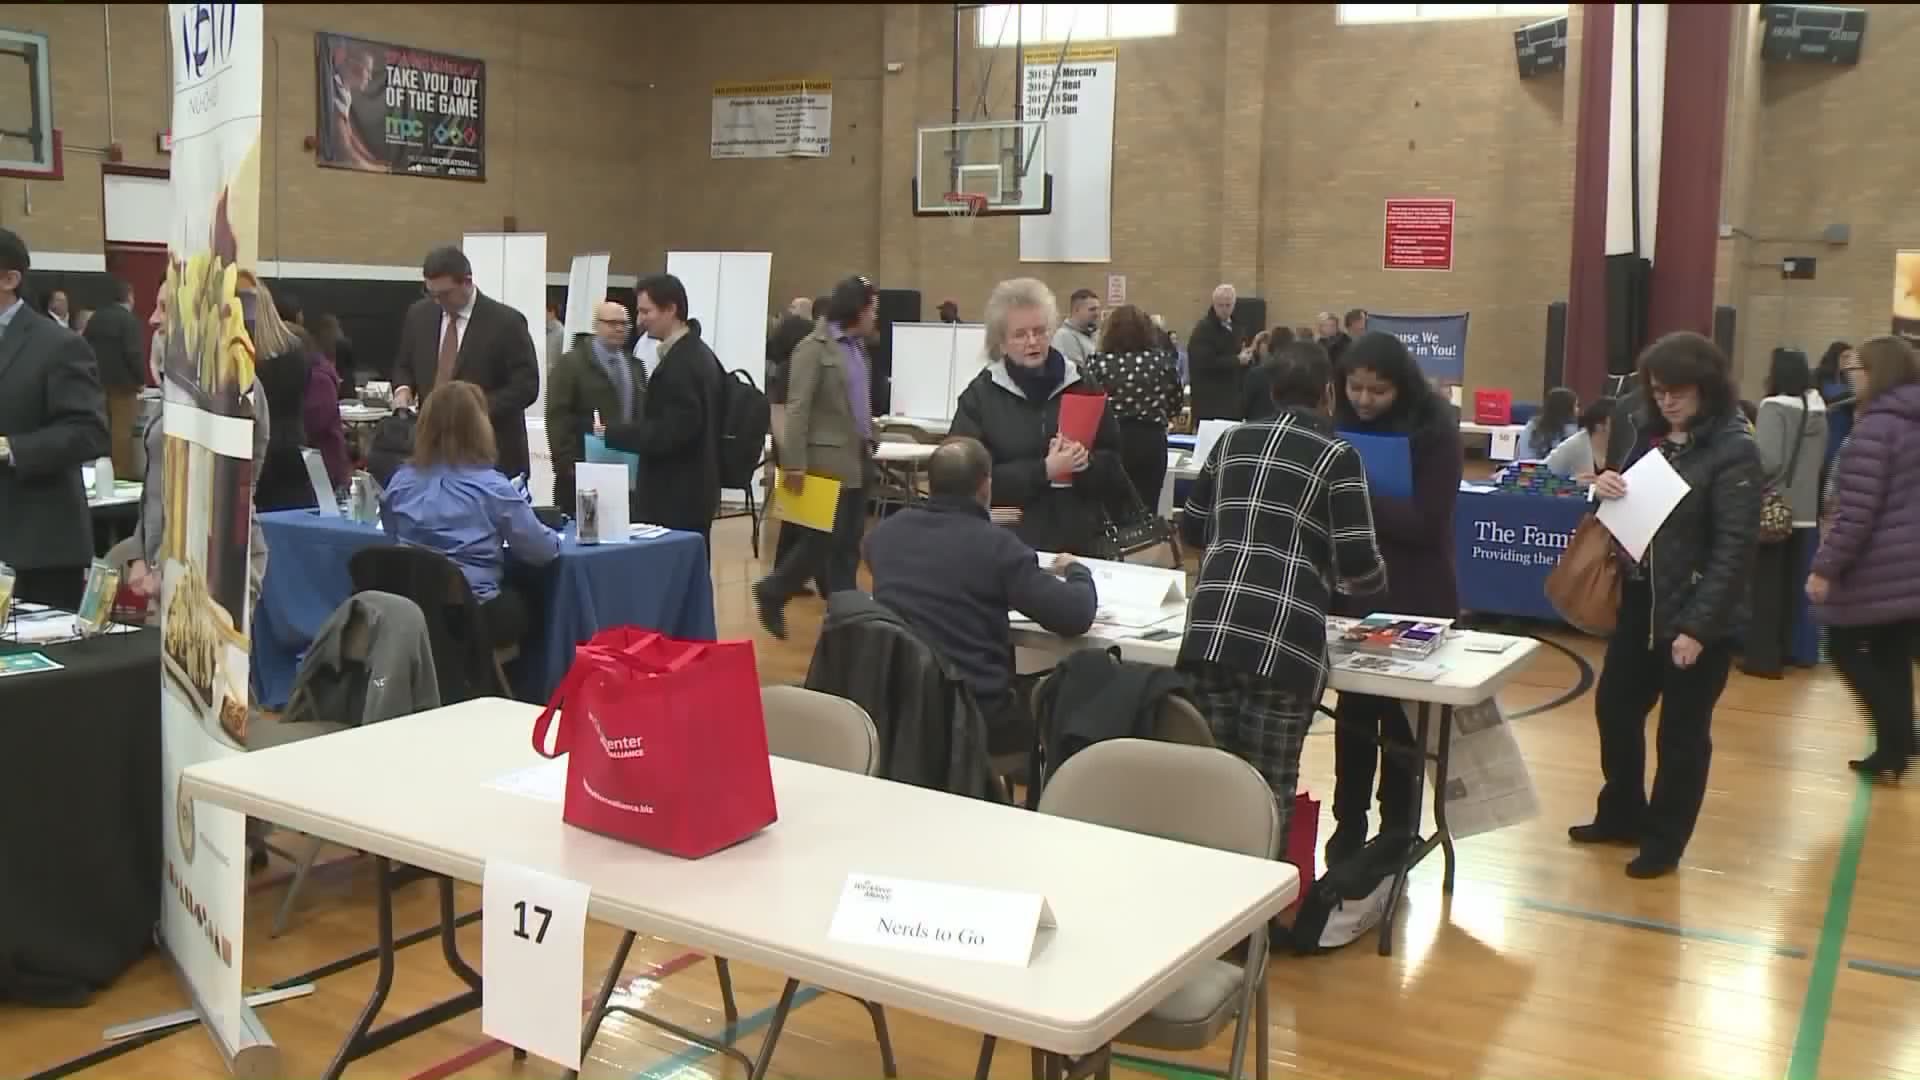 Several hundred job seekers and nearly 70 employers packed the Parsons Center gym between 11 AM and 2 PM.